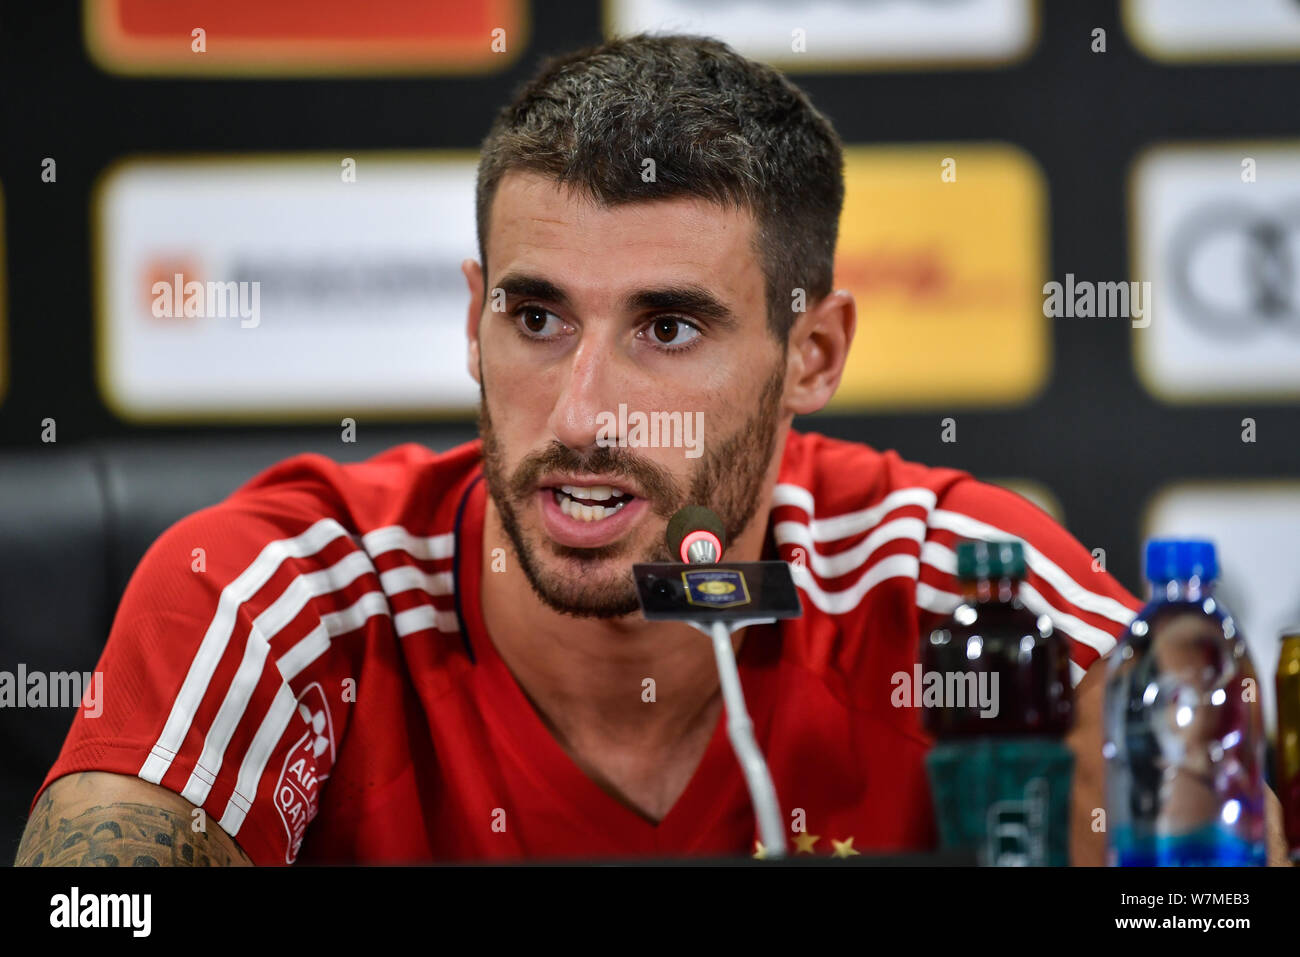 Spanish football player Javi Martinez of FC Bayern Munich attends a press conference for the Shenzhen match of the 2017 International Champions Cup Ch Stock Photo